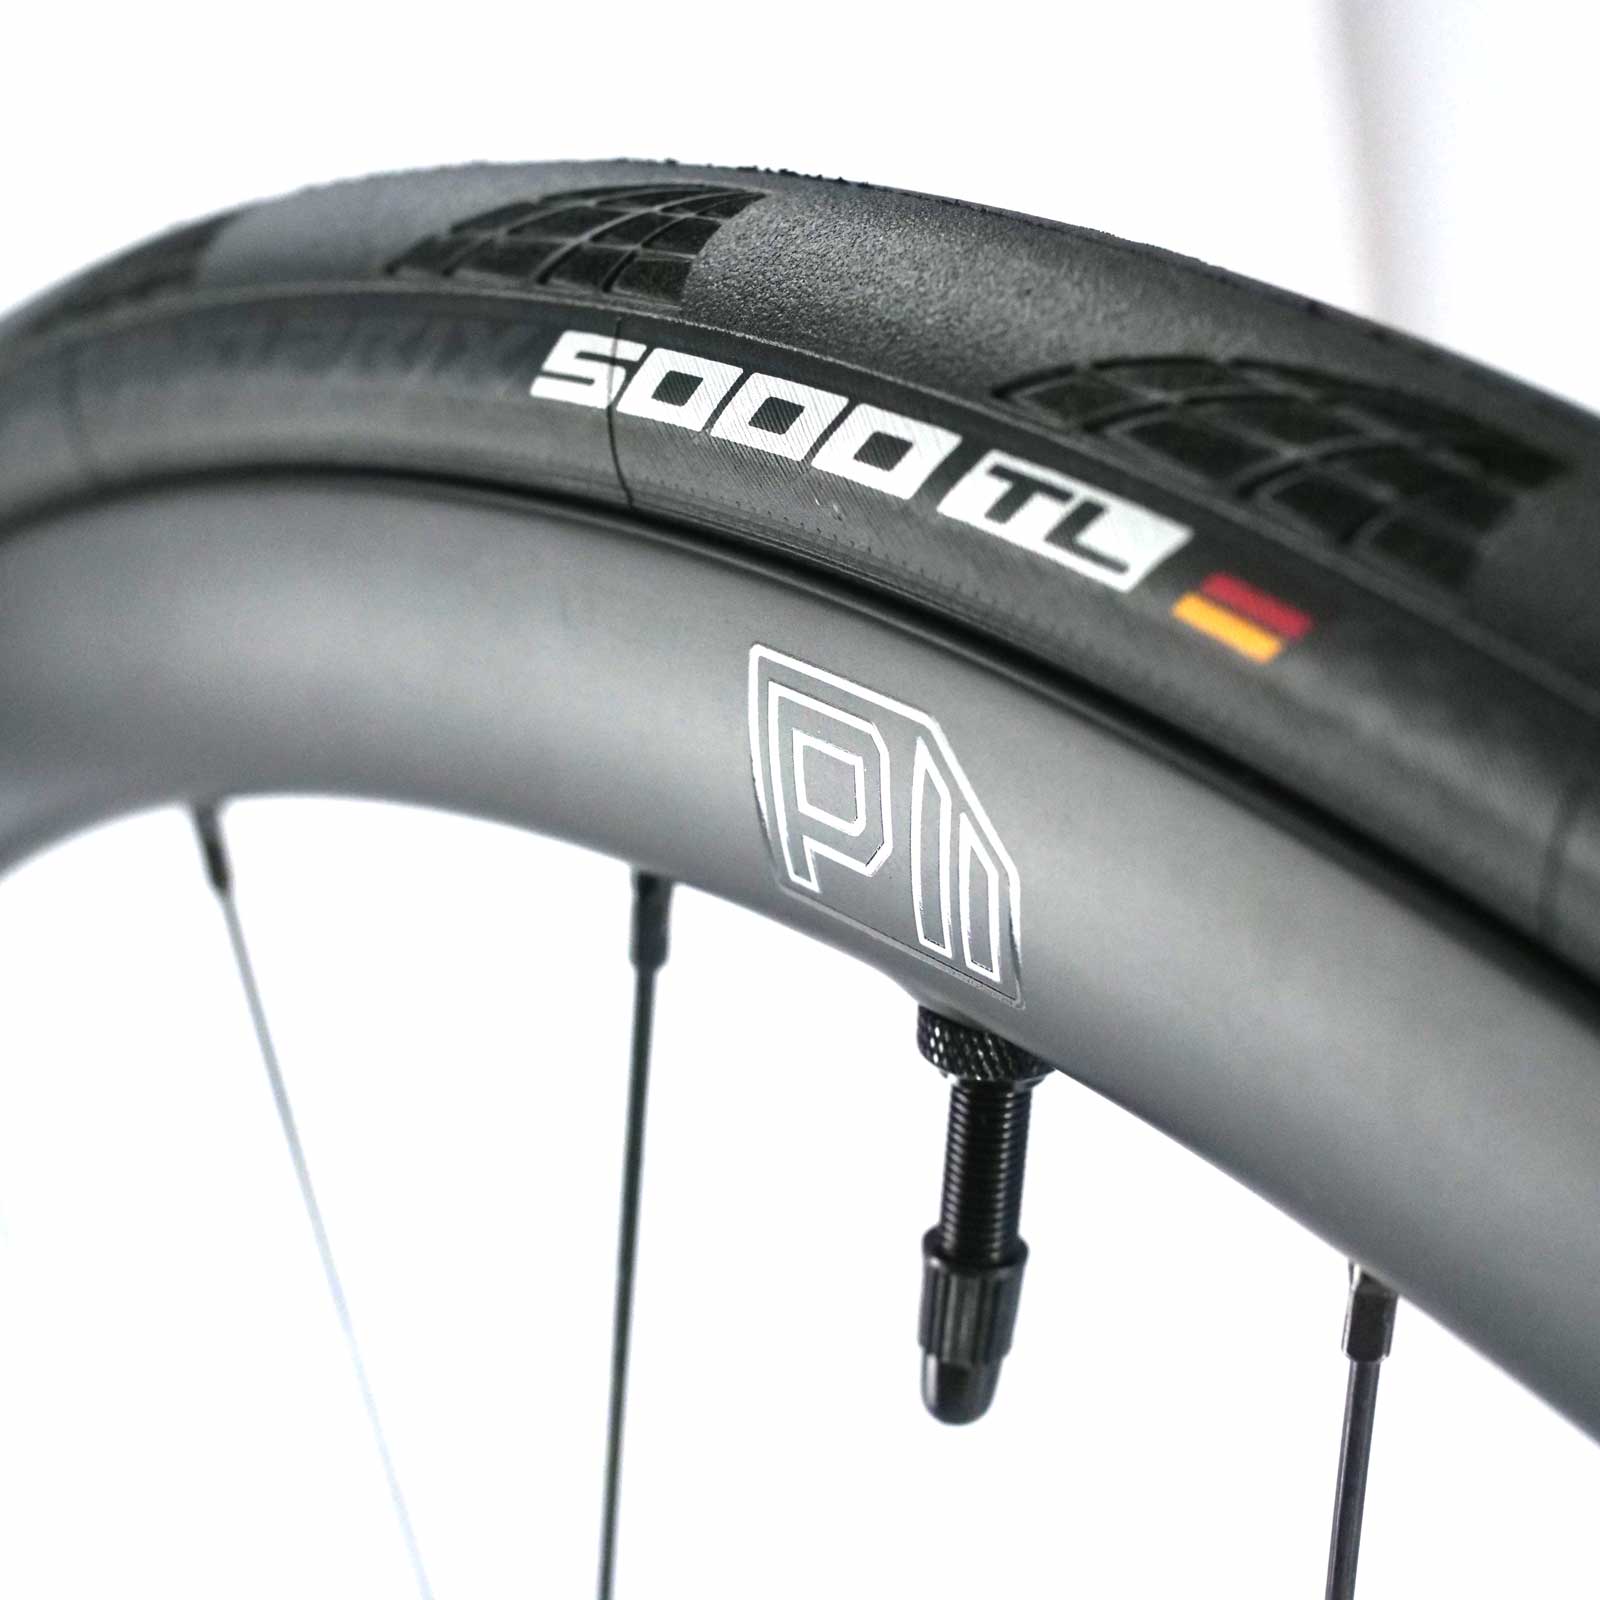 Continental Gp5000 Tubeless Tyre Pacenti Cycle Design